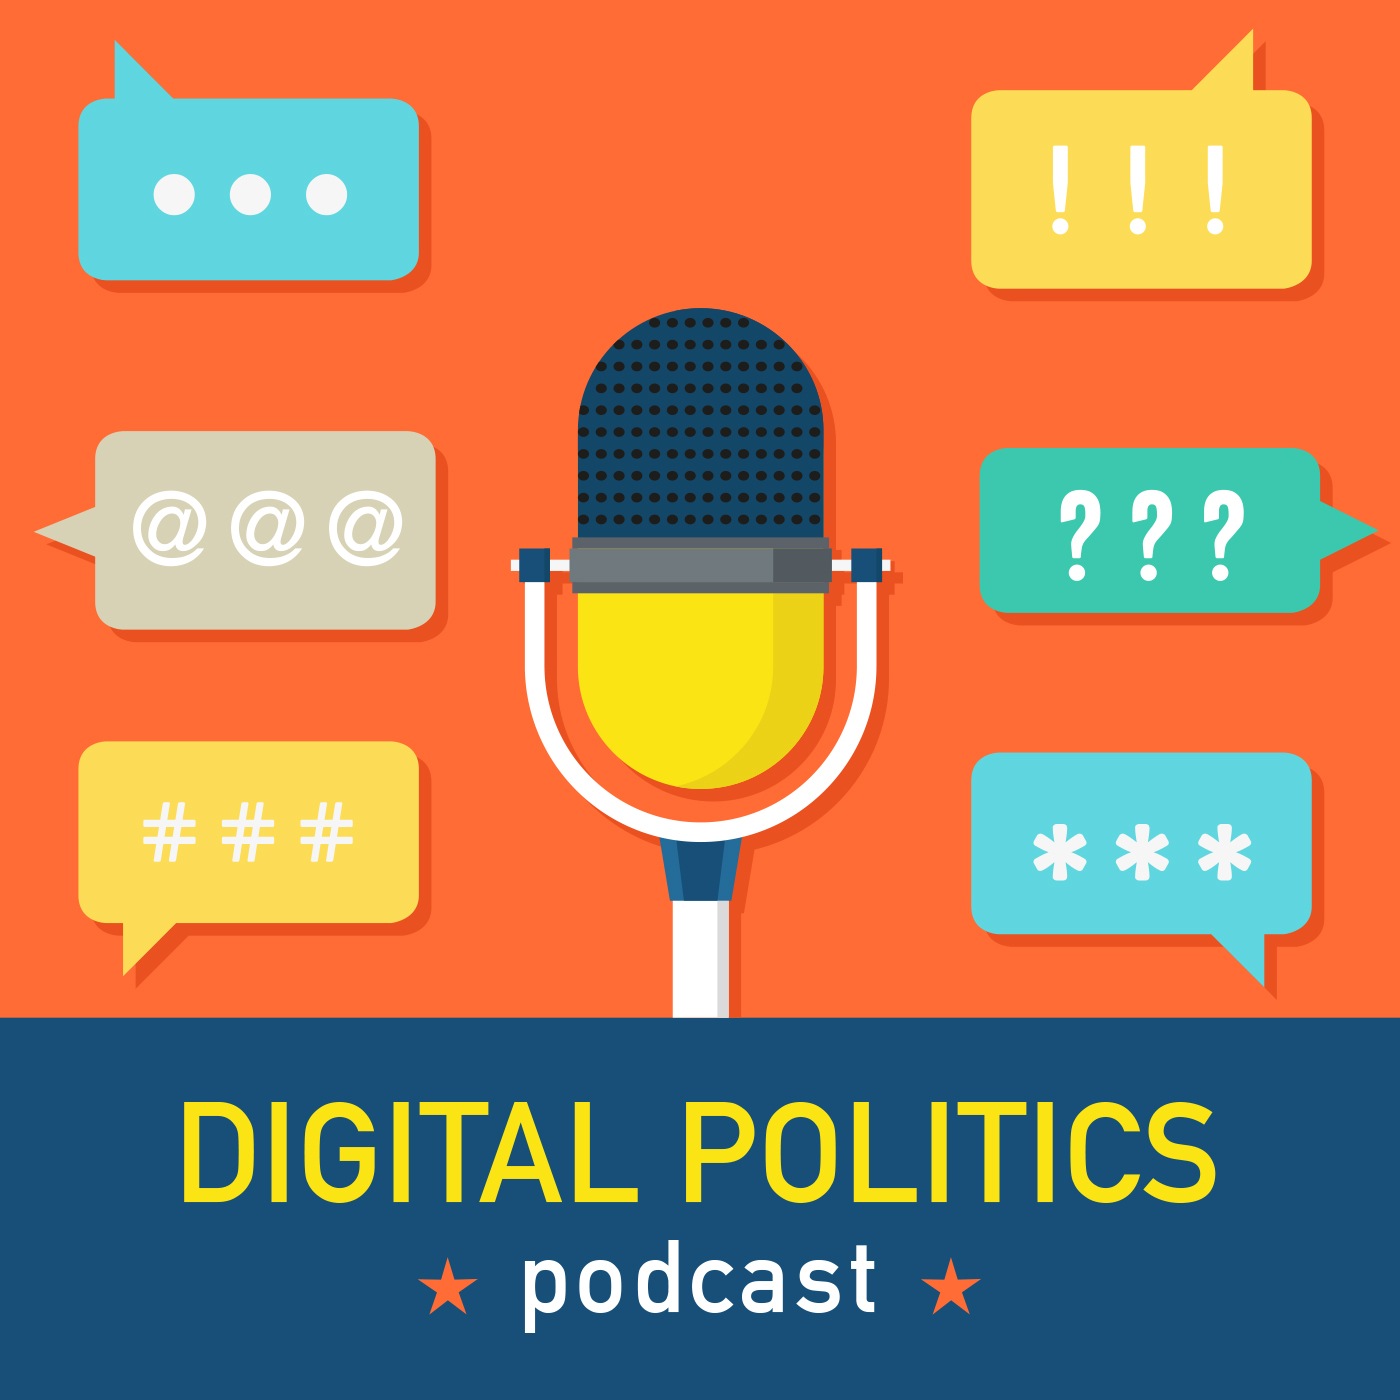 Digital Politics Podcast - I was a guest to talk about downballot races and how they can use social media to better connect with the electorate.